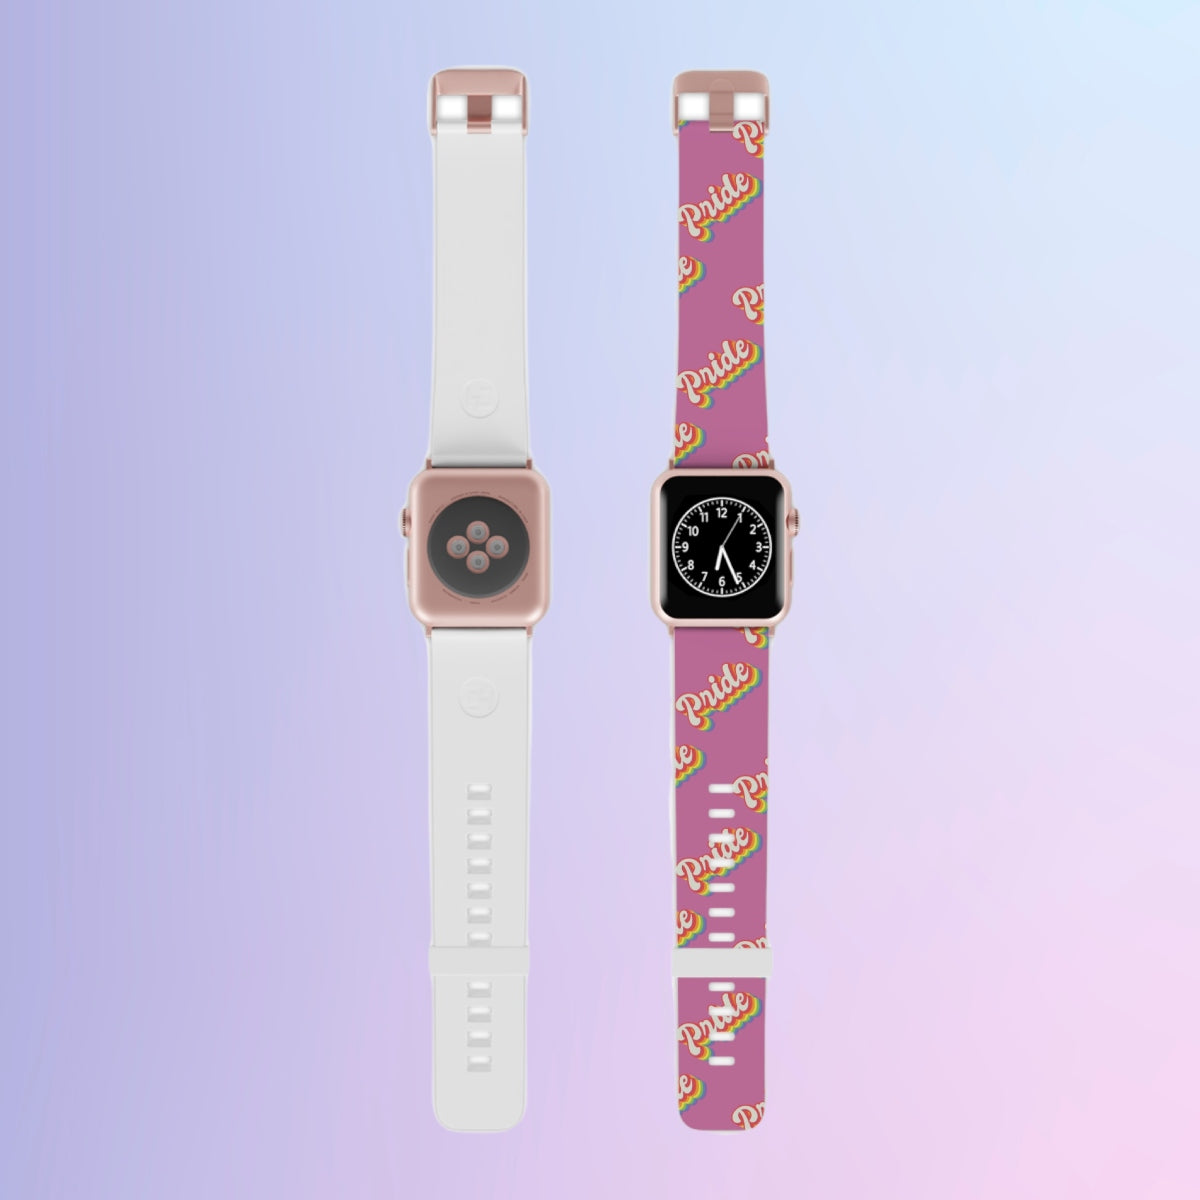 Two custom-printed pink and white Pride Bands for Apple Watch, a fashionable alternative on a pink background.